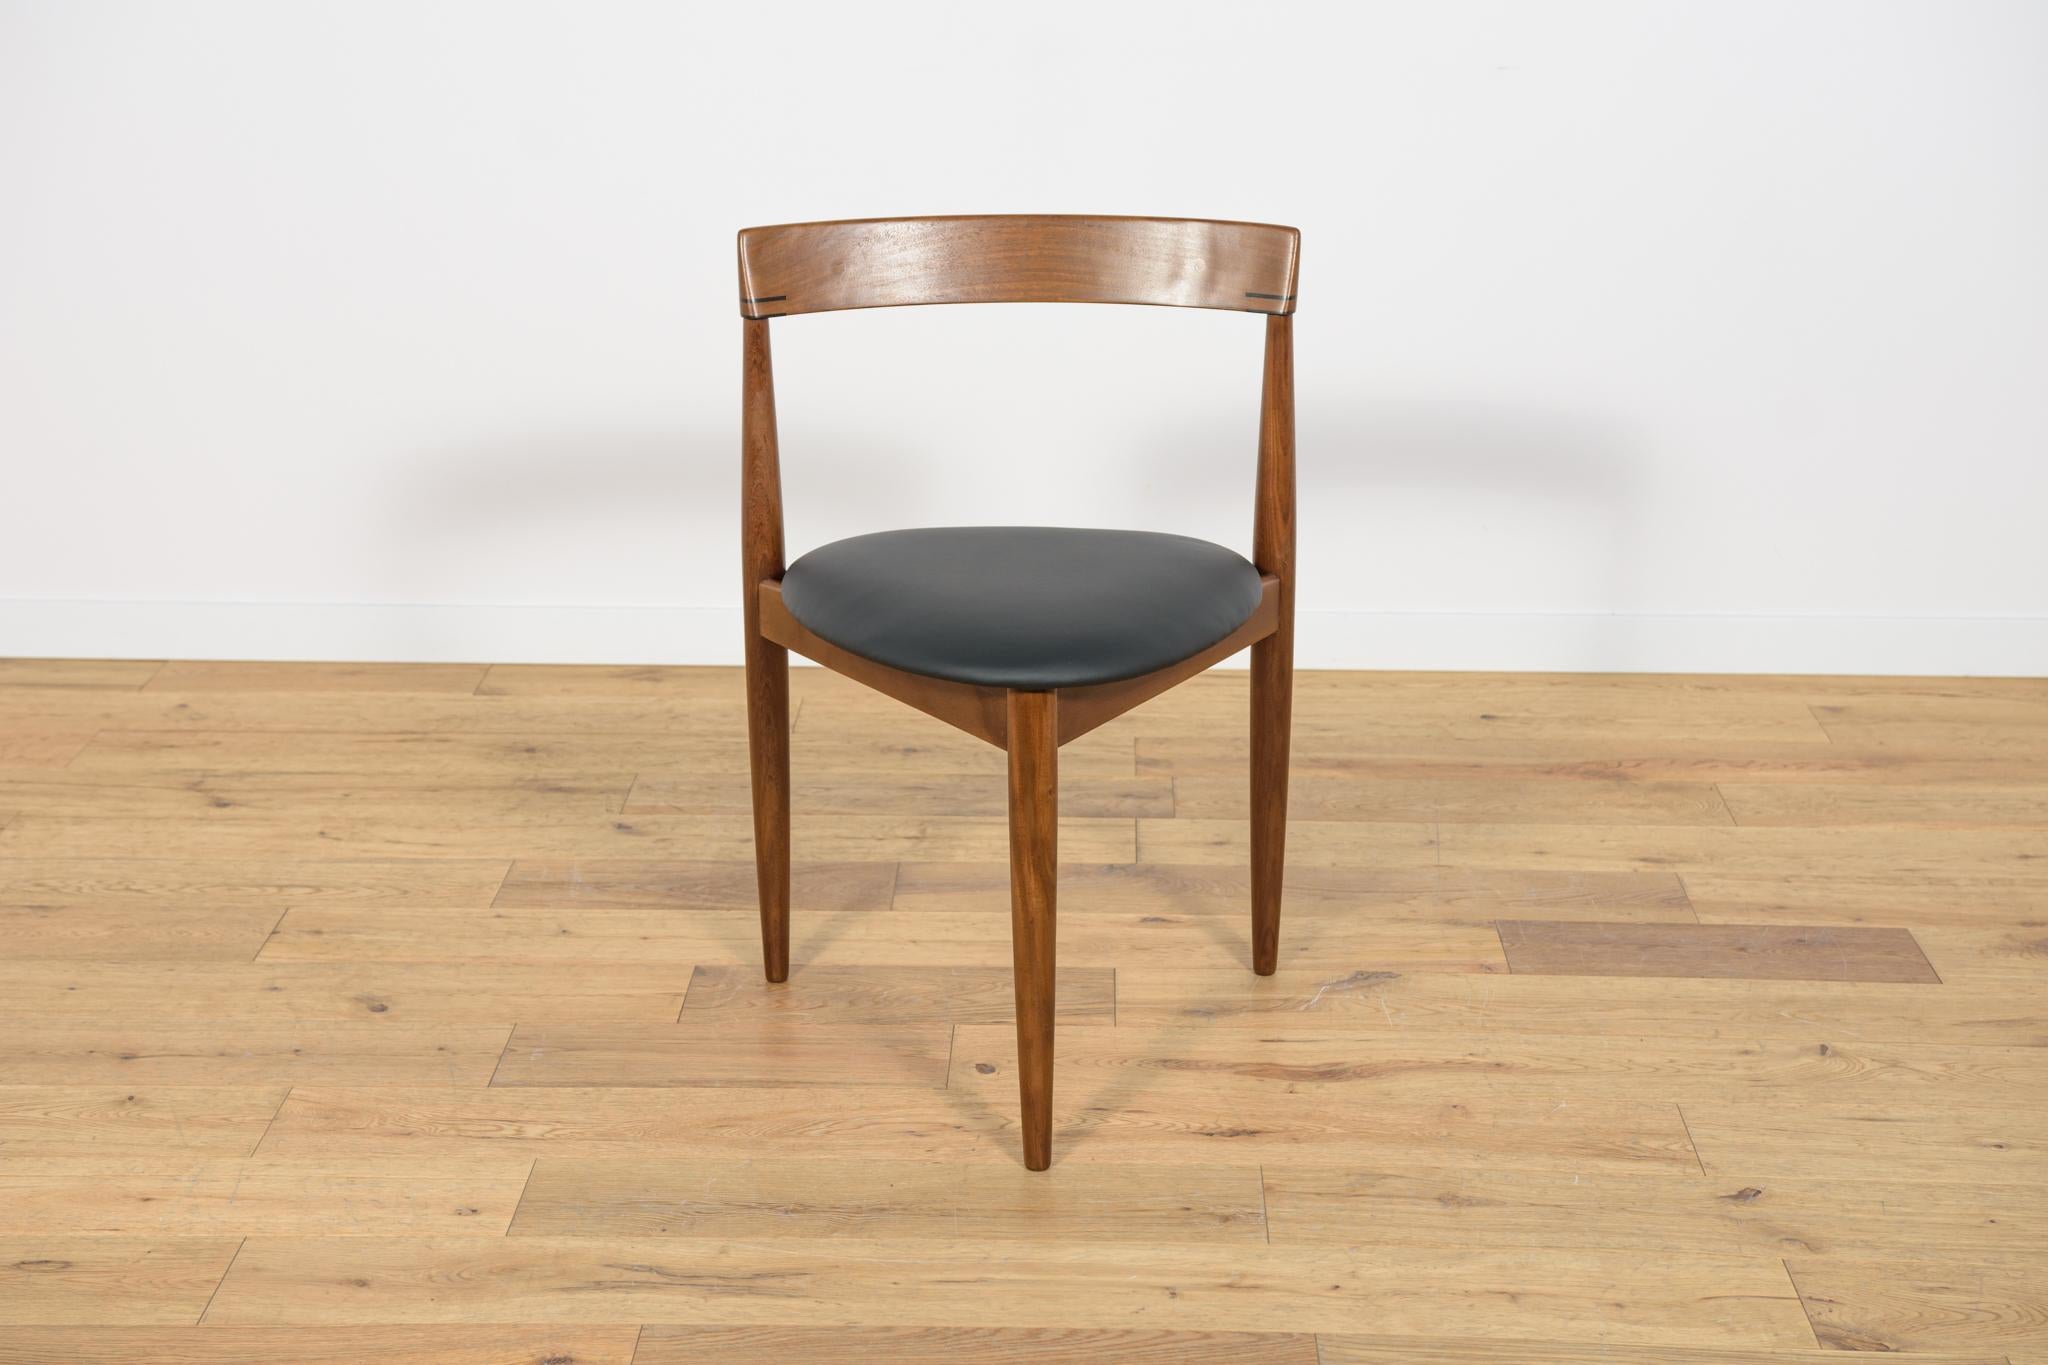 Leather  Mid-Century Teak Dining Table and Chairs Set by Hans Olsen for Frem Røjle. For Sale